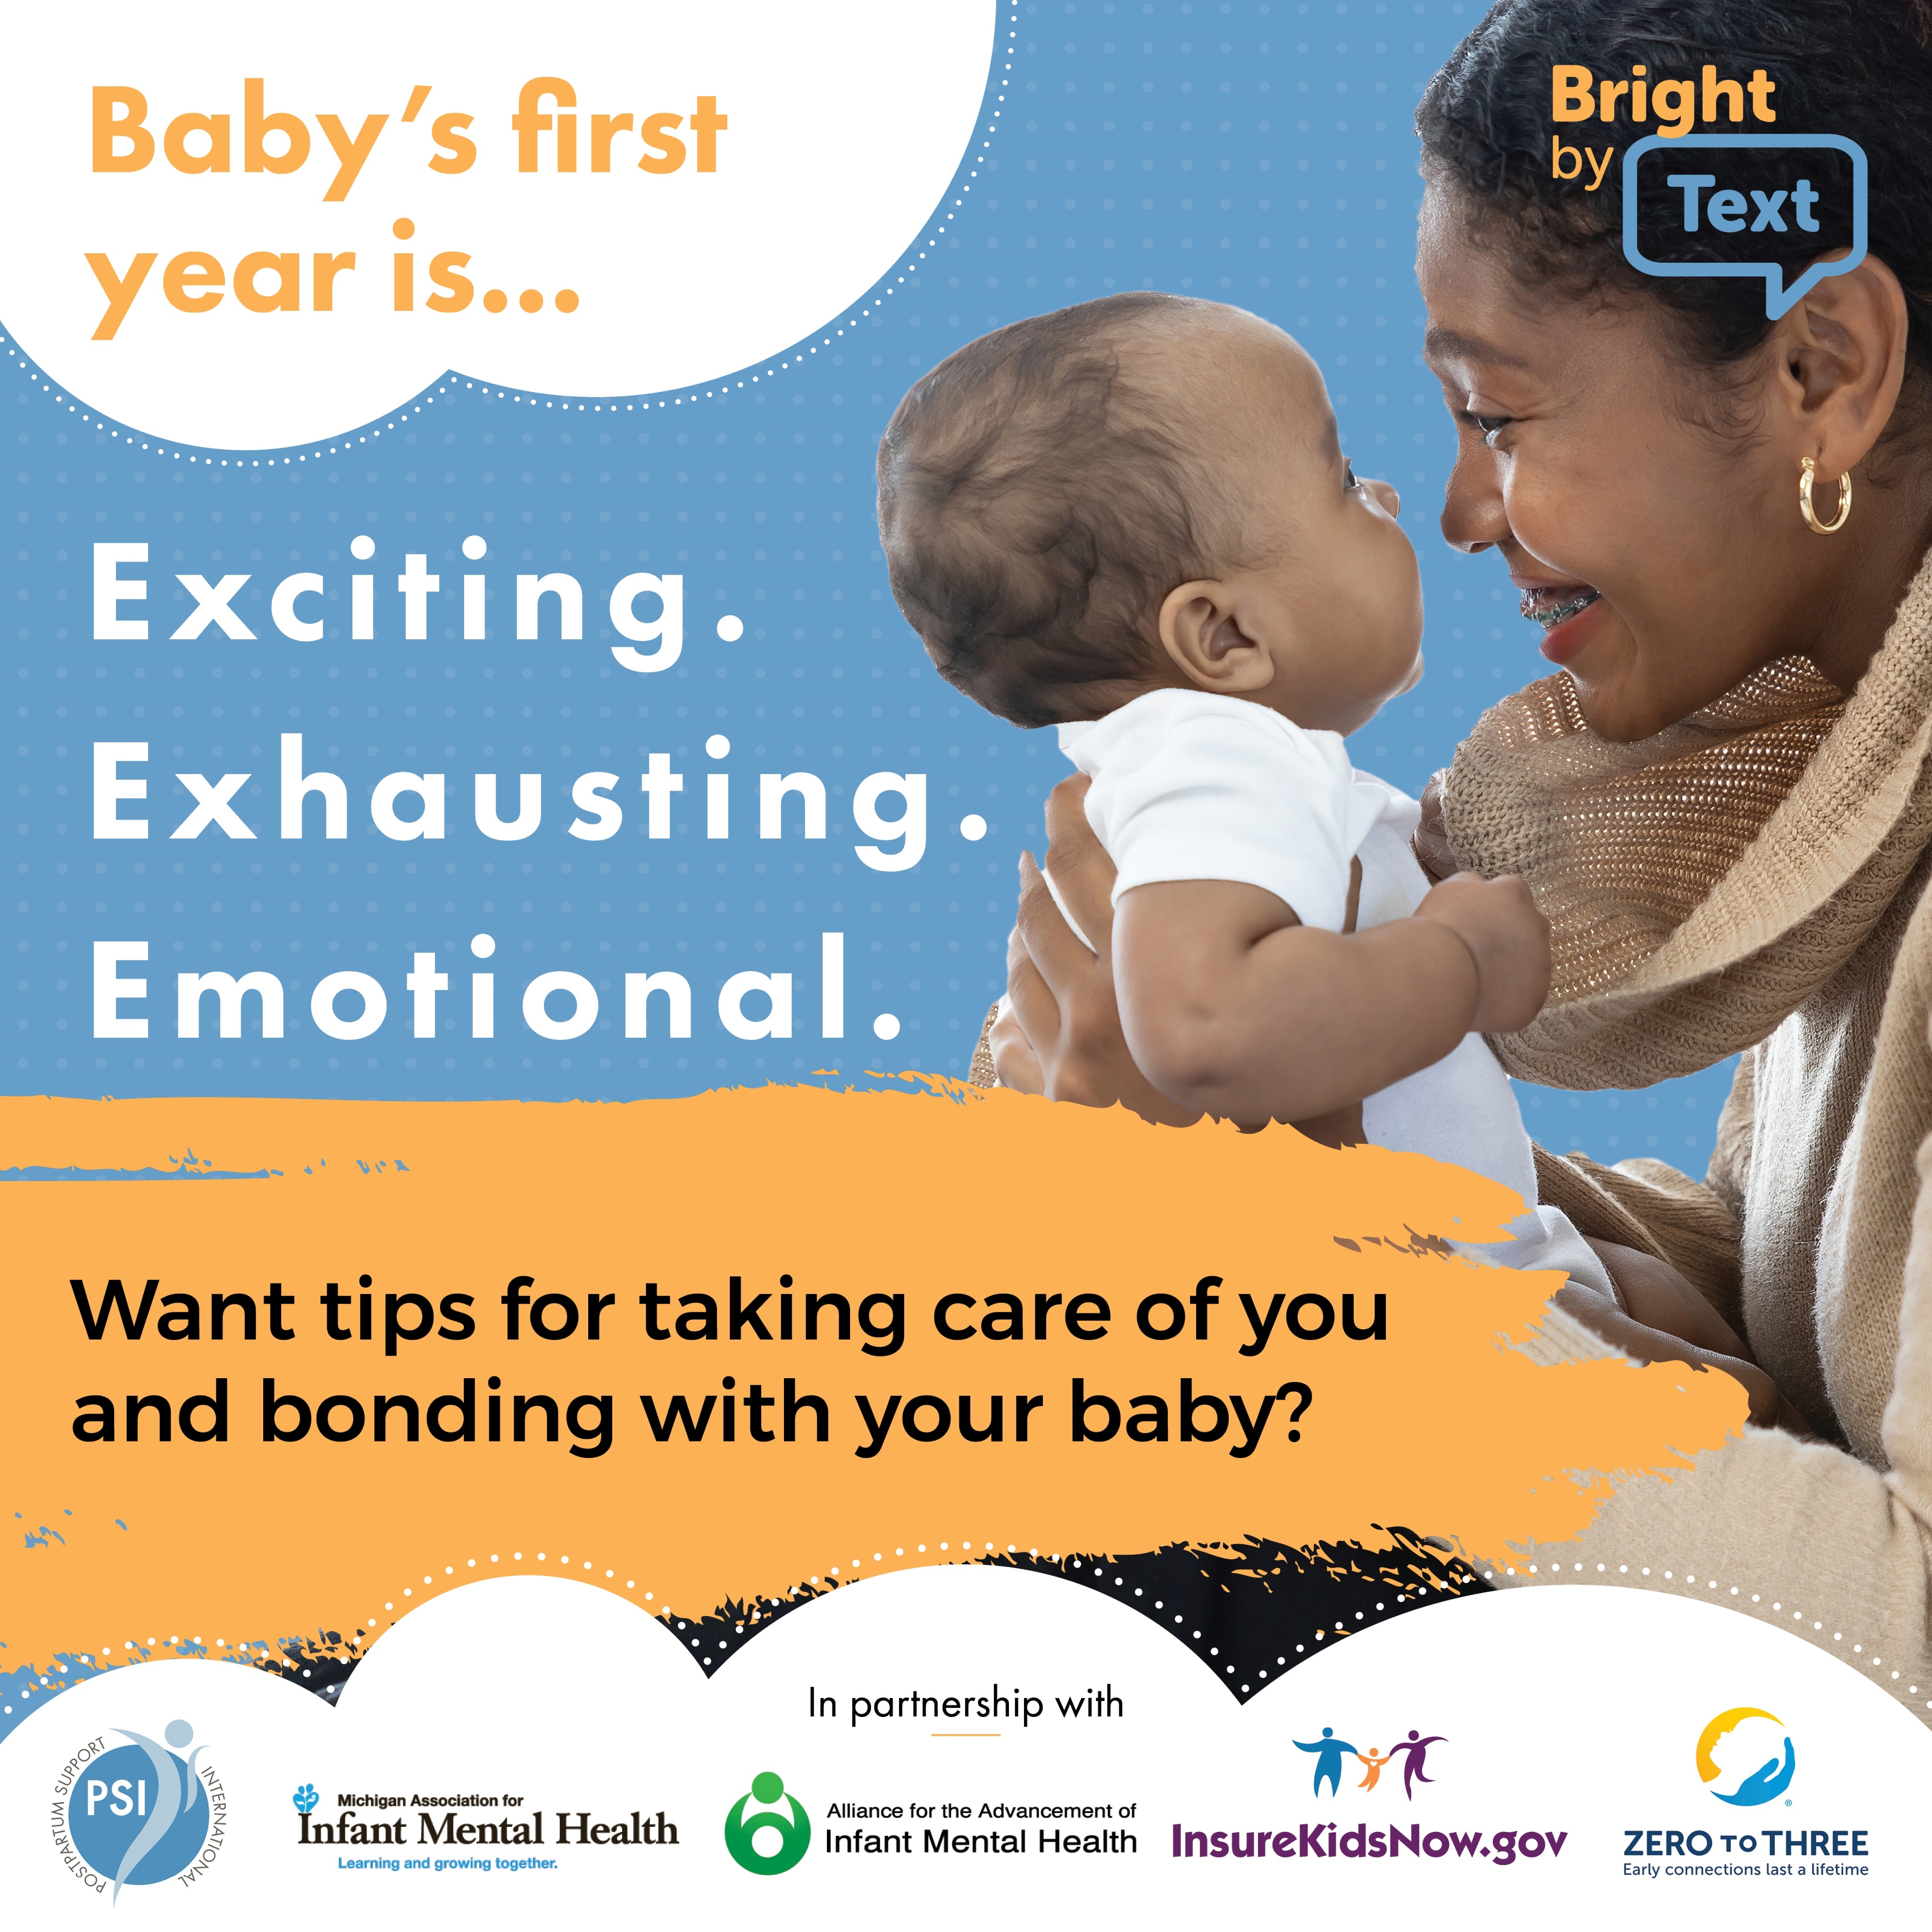 
Bright by Text Launches New Program to Support Mental Health of New Parents and Babies